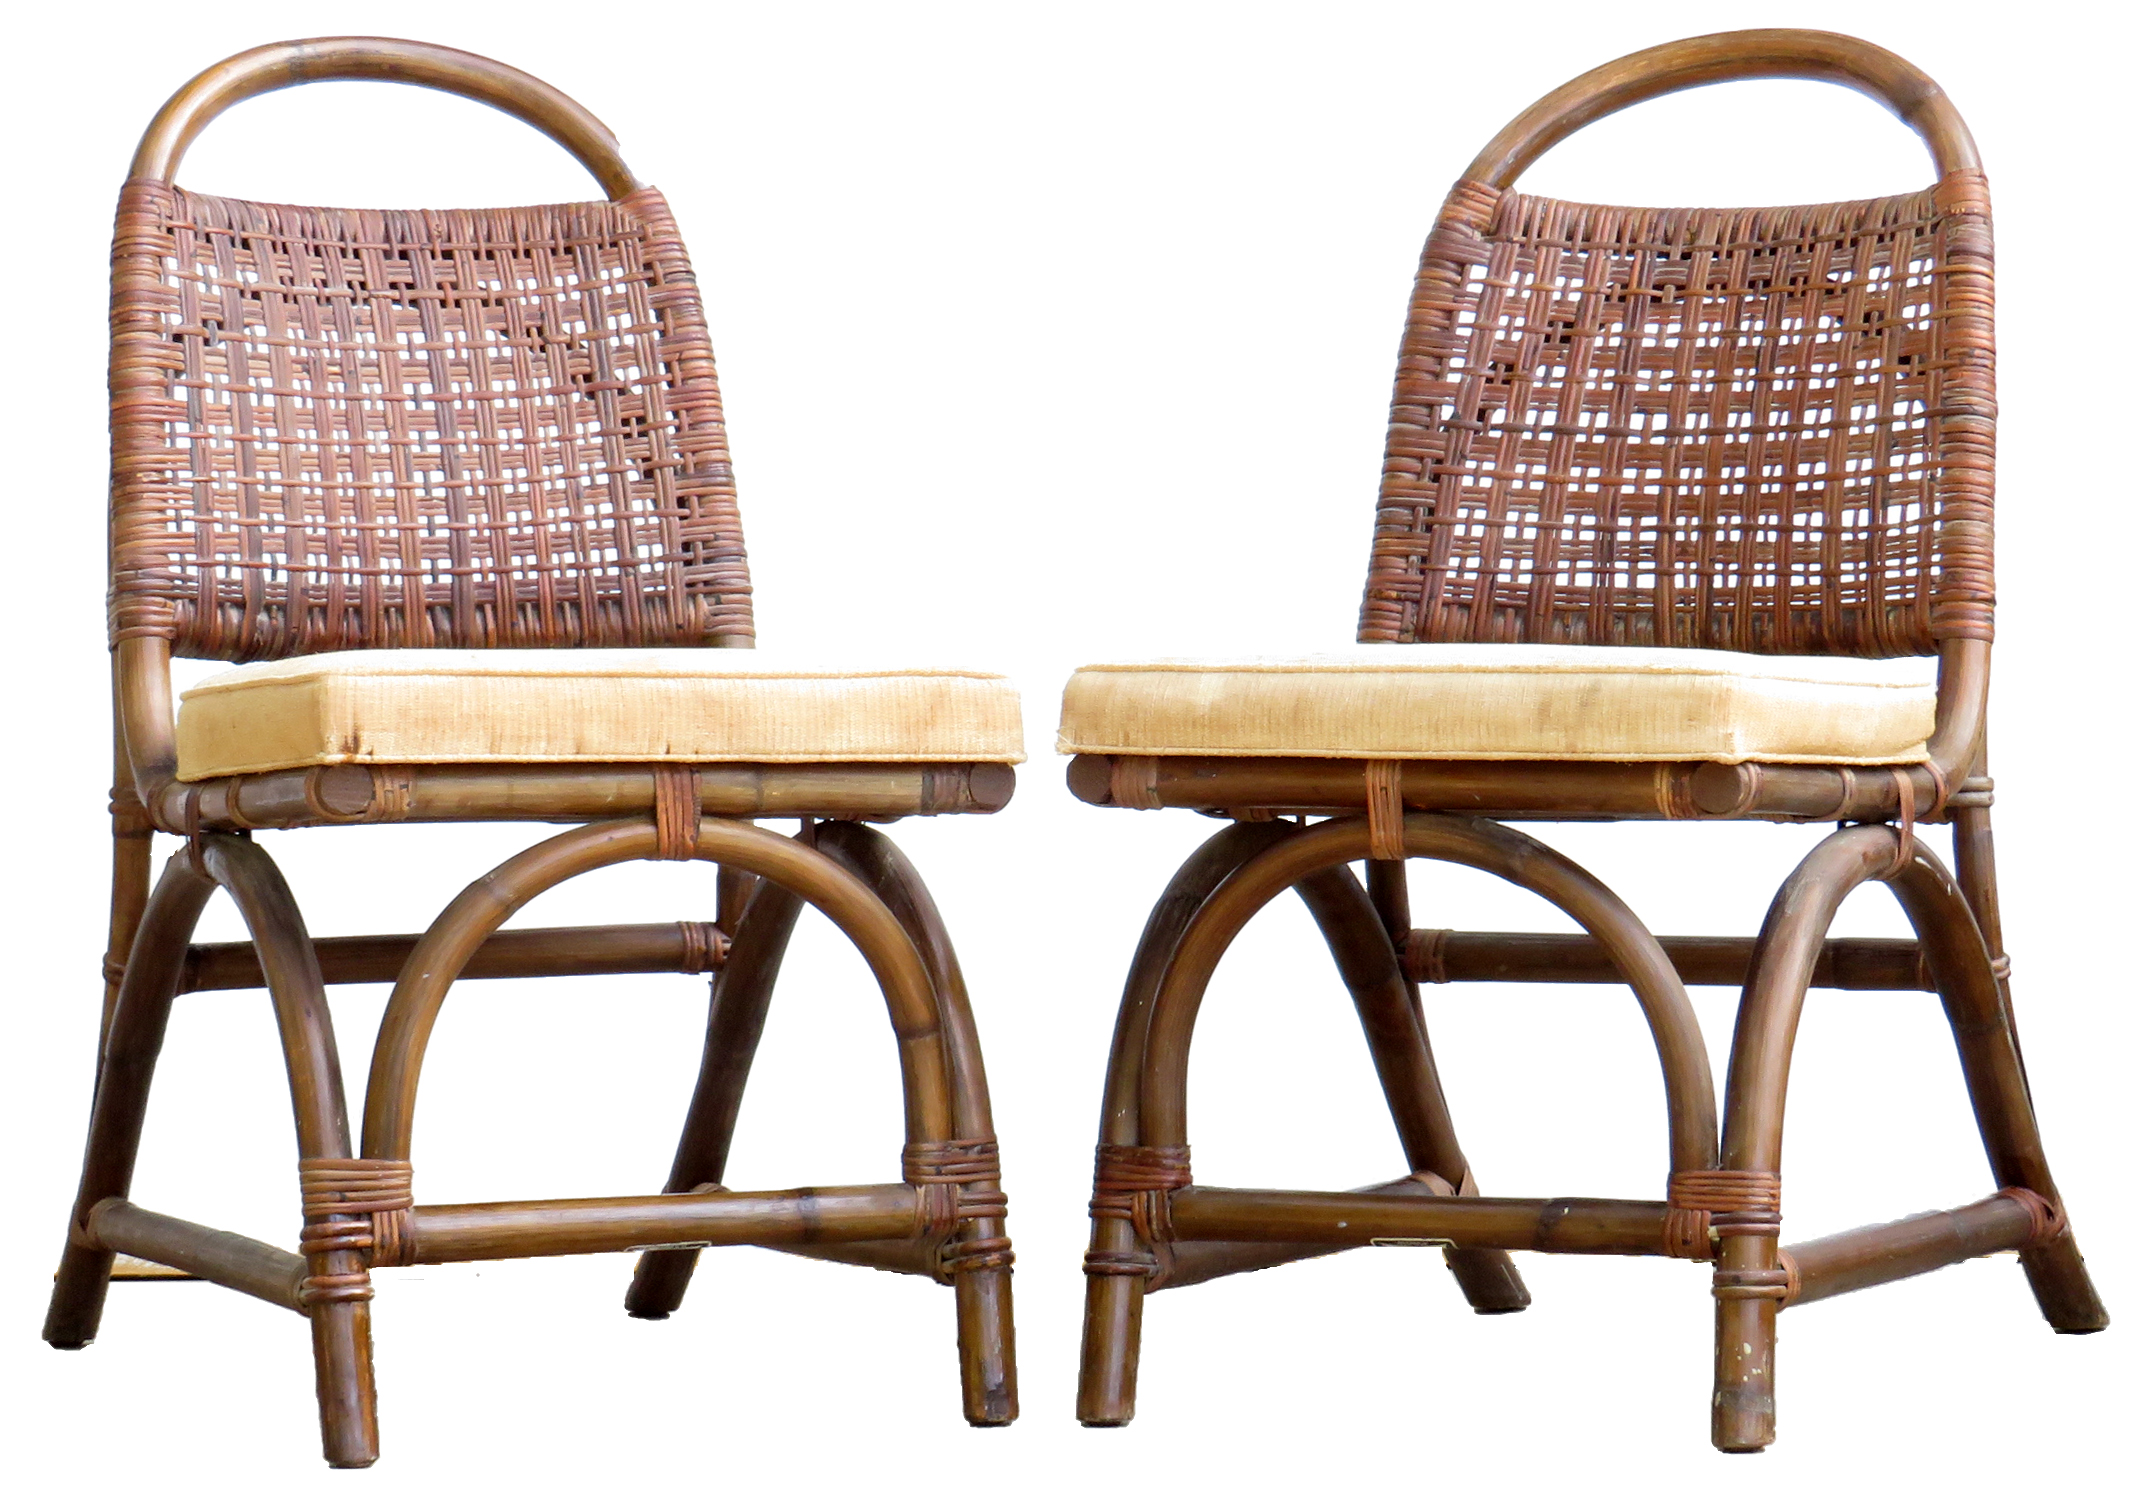 Vintage Calif-Asia Bamboo & Cane Chairs~P77661960